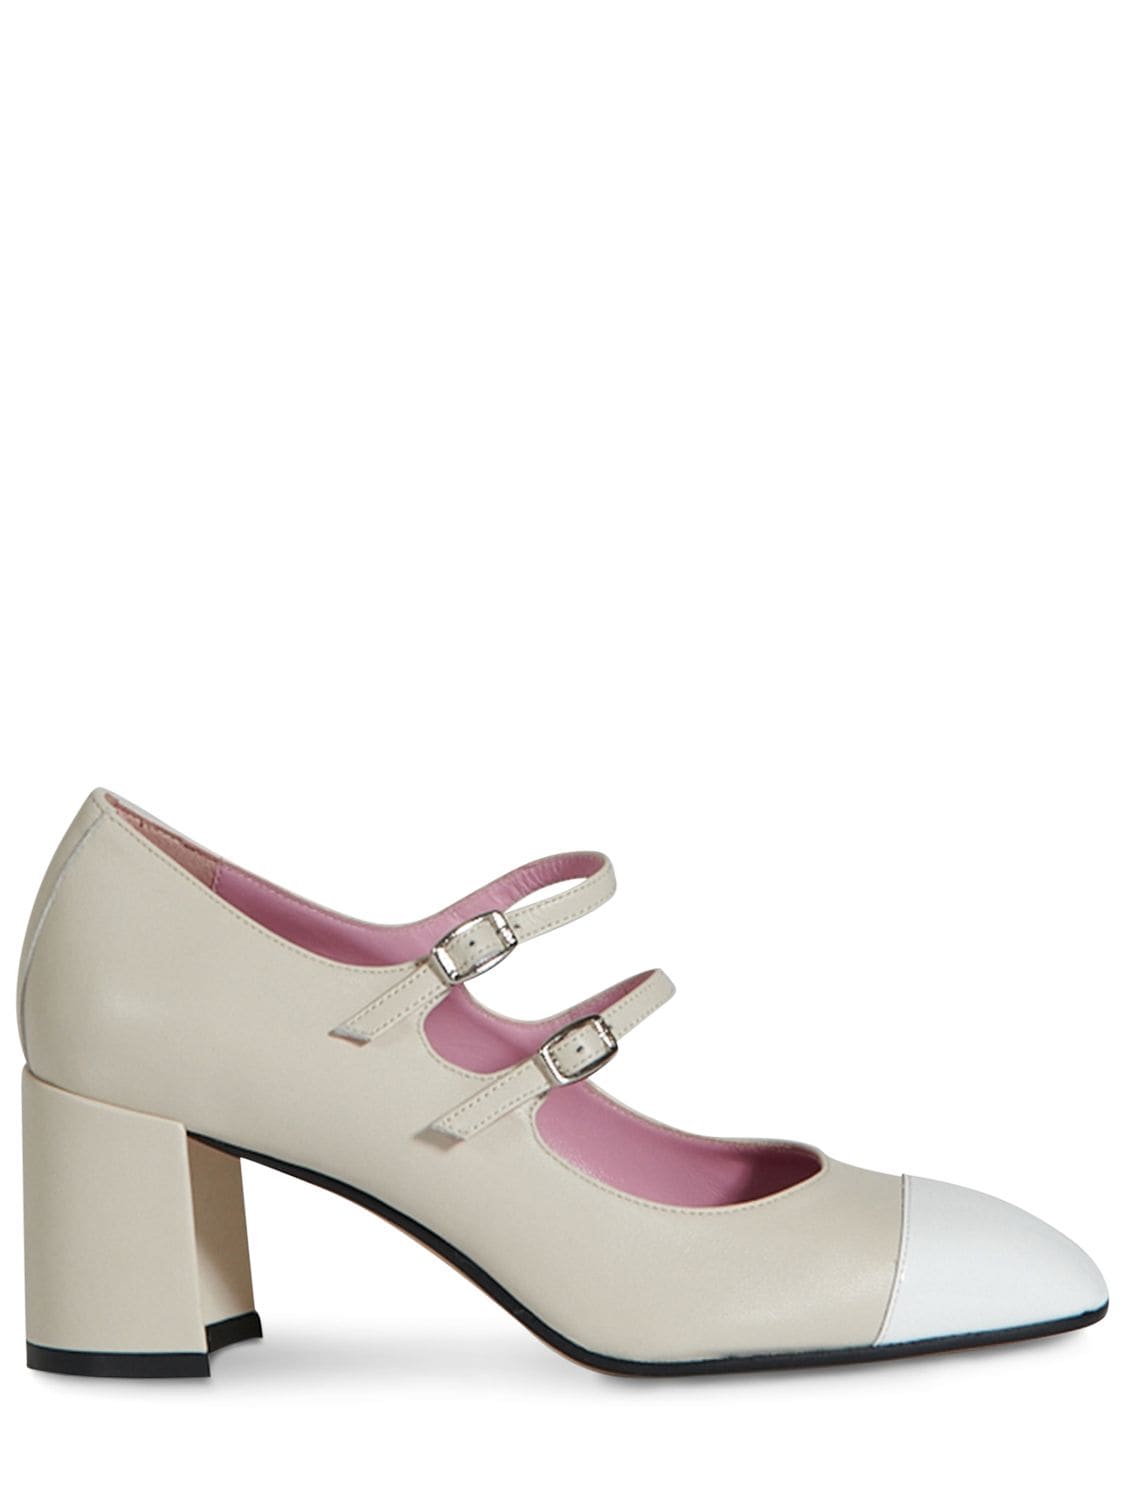 Carel 60mm Cherry Leather Pumps In Beige,white